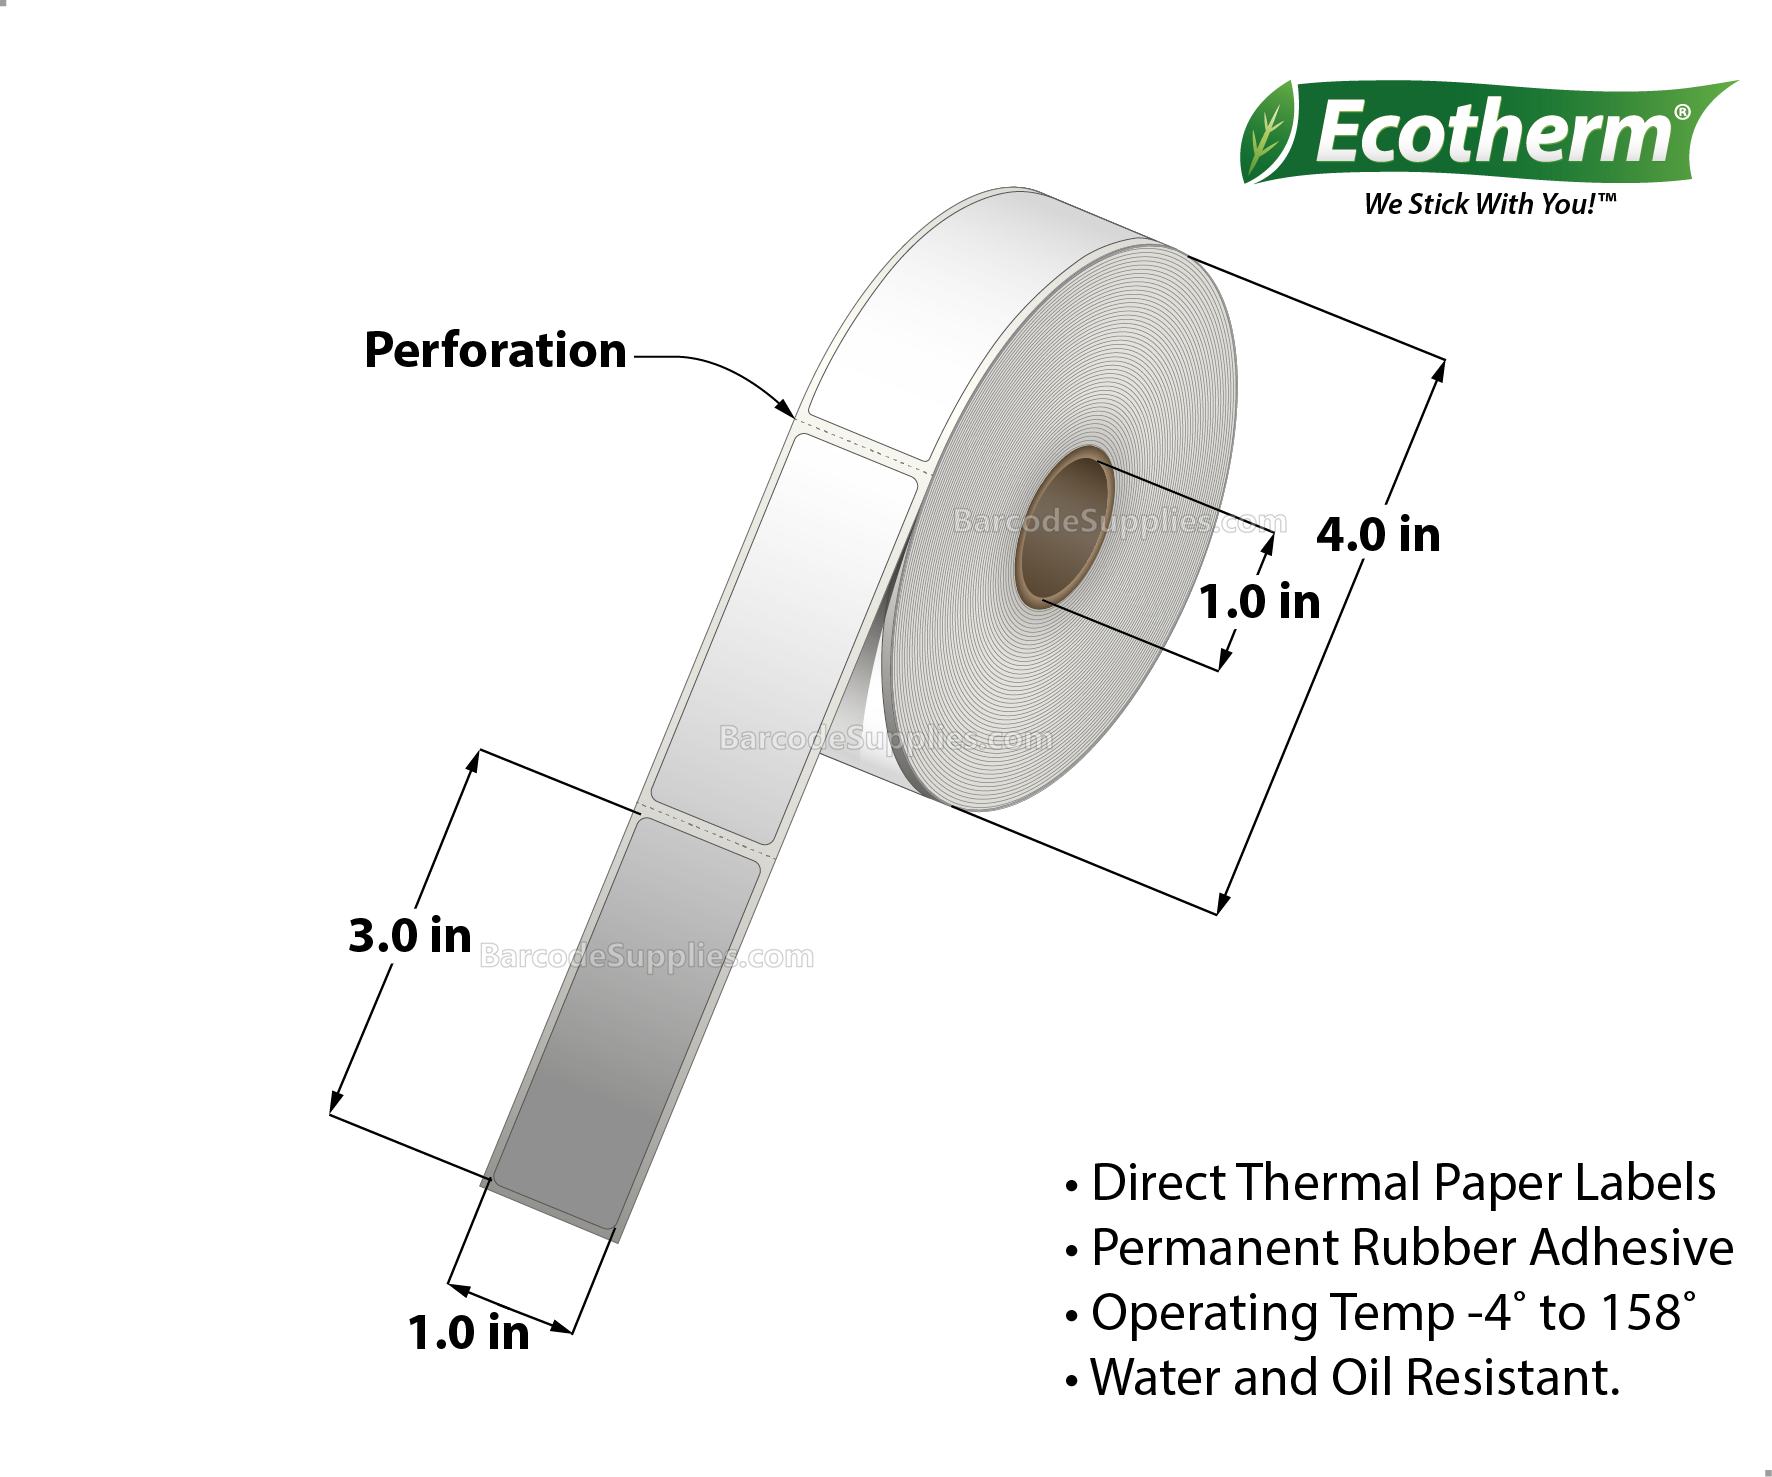 1 x 3 Direct Thermal White Labels With Rubber Adhesive - Perforated - 840 Labels Per Roll - Carton Of 6 Rolls - 5040 Labels Total - MPN: ECOTHERM15112-6